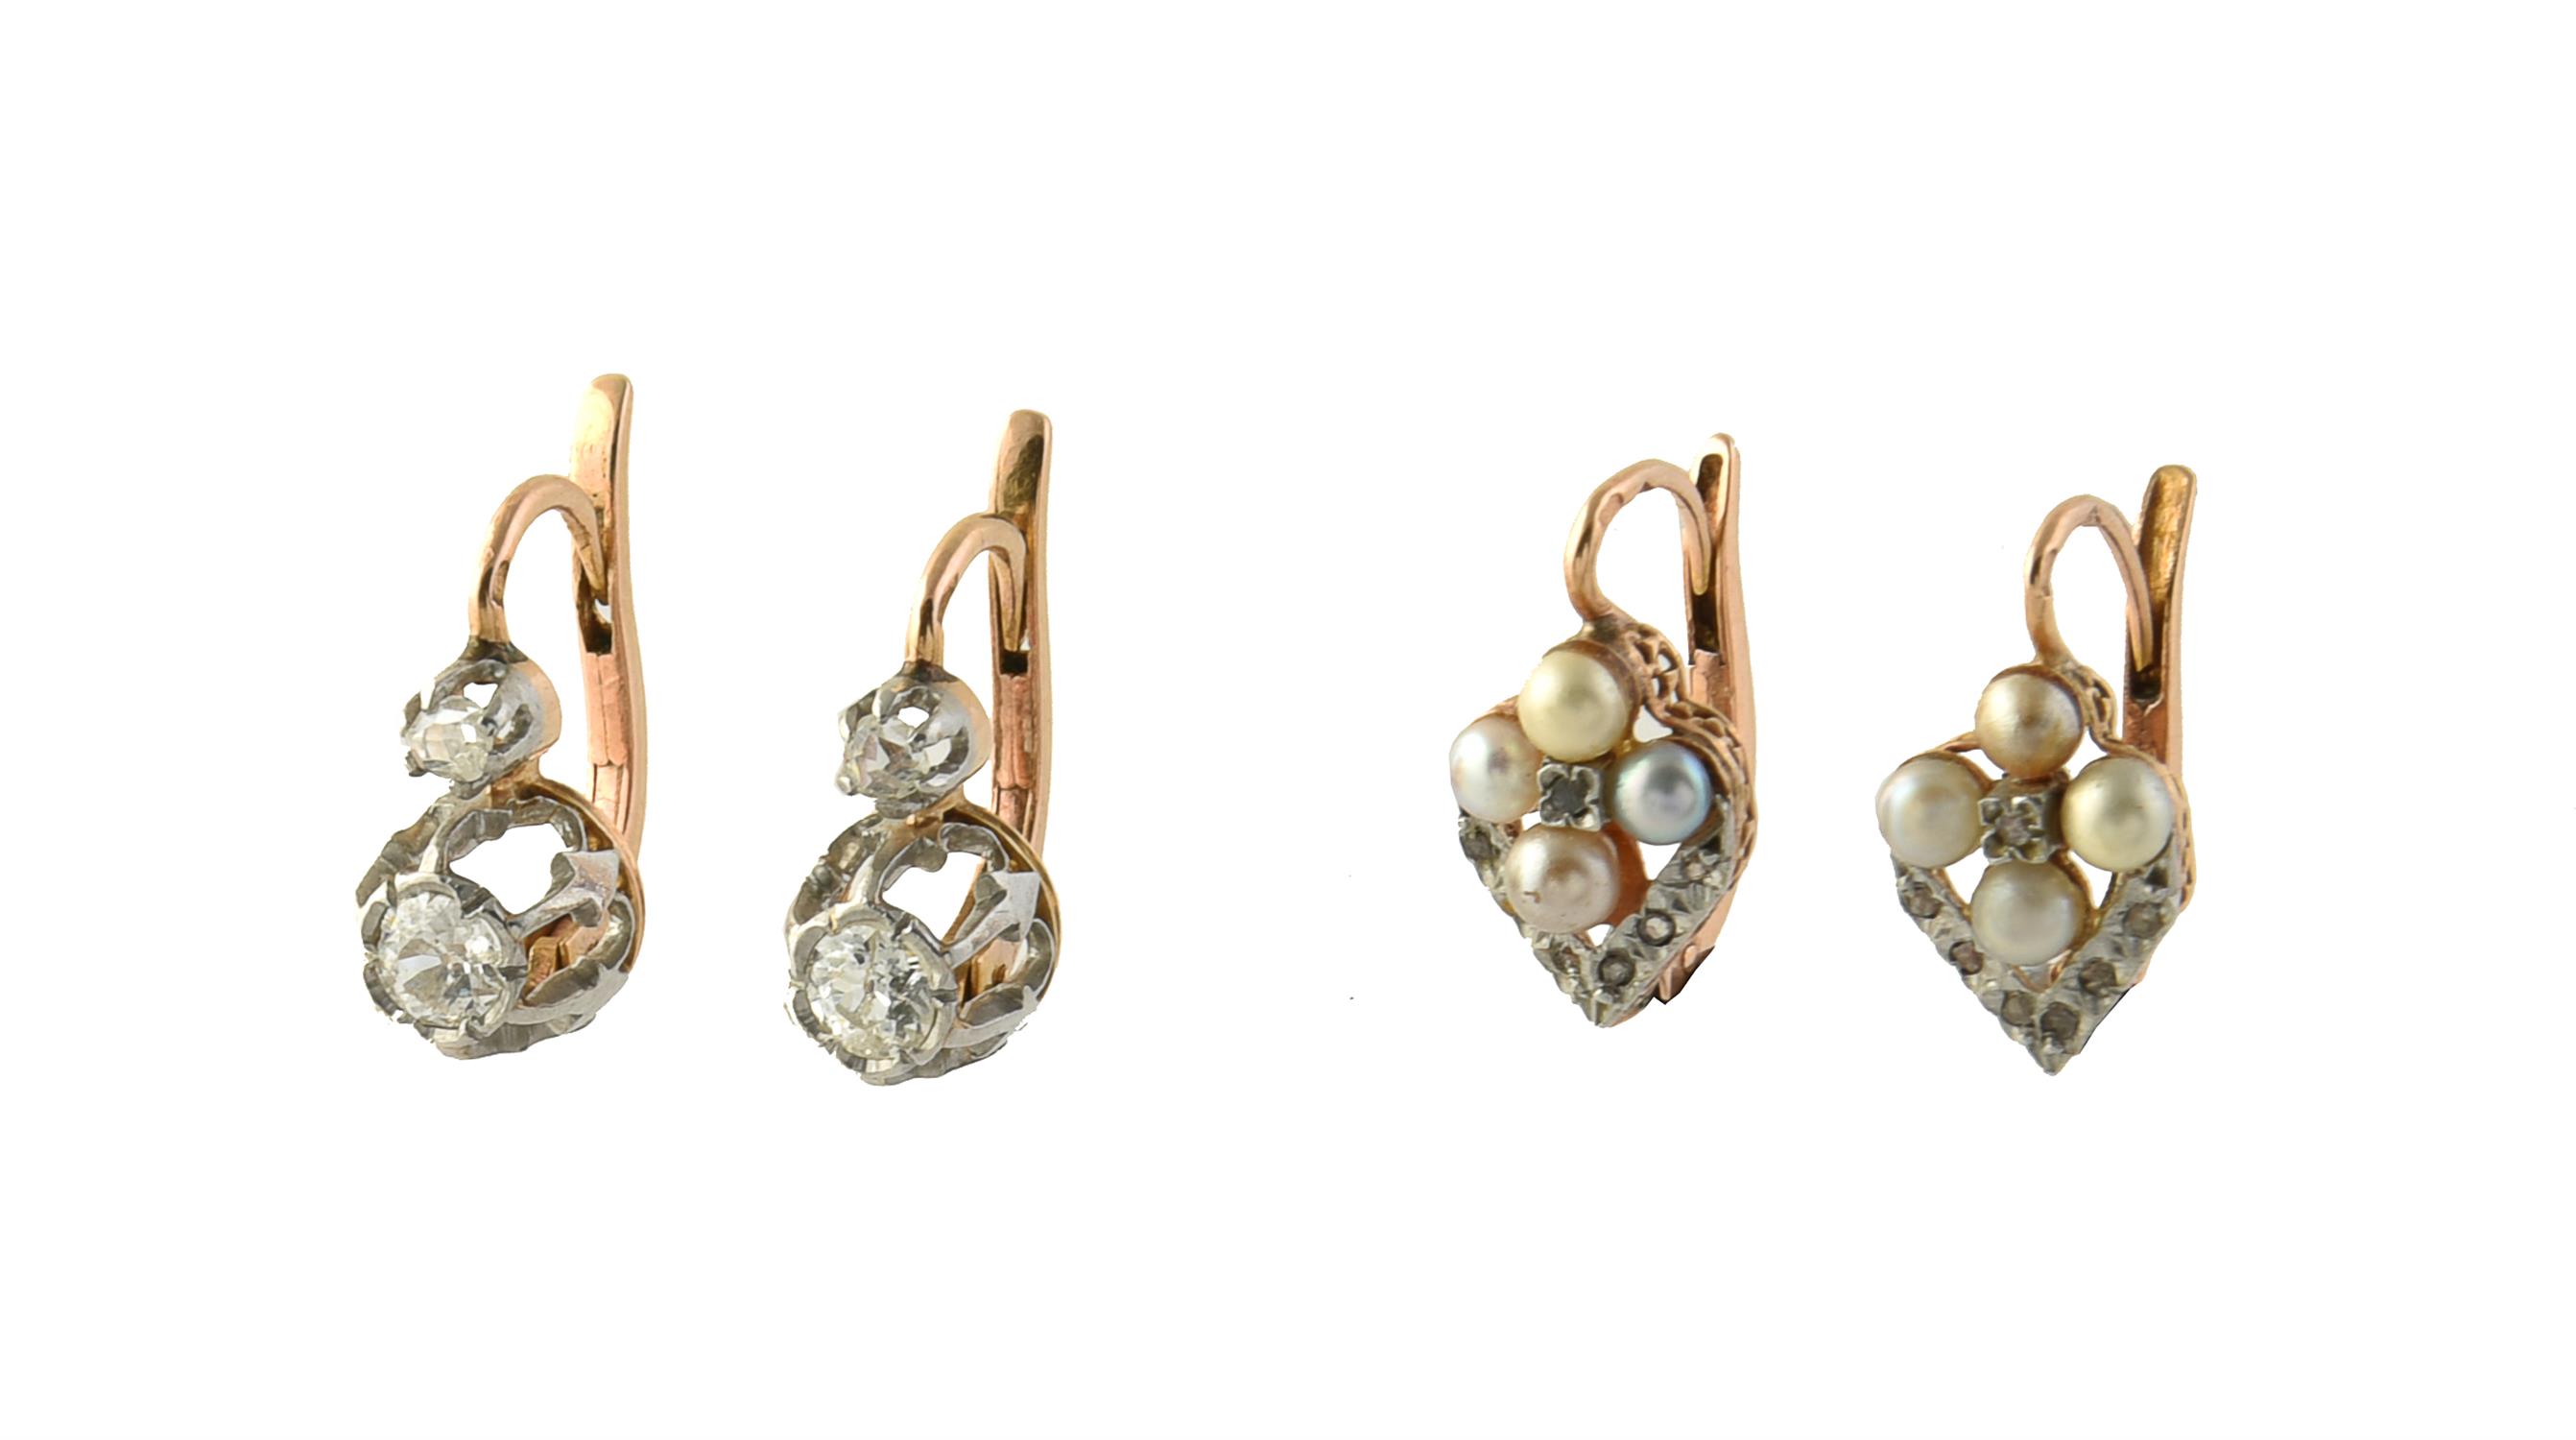 A pair of French early 20th century diamond earrings